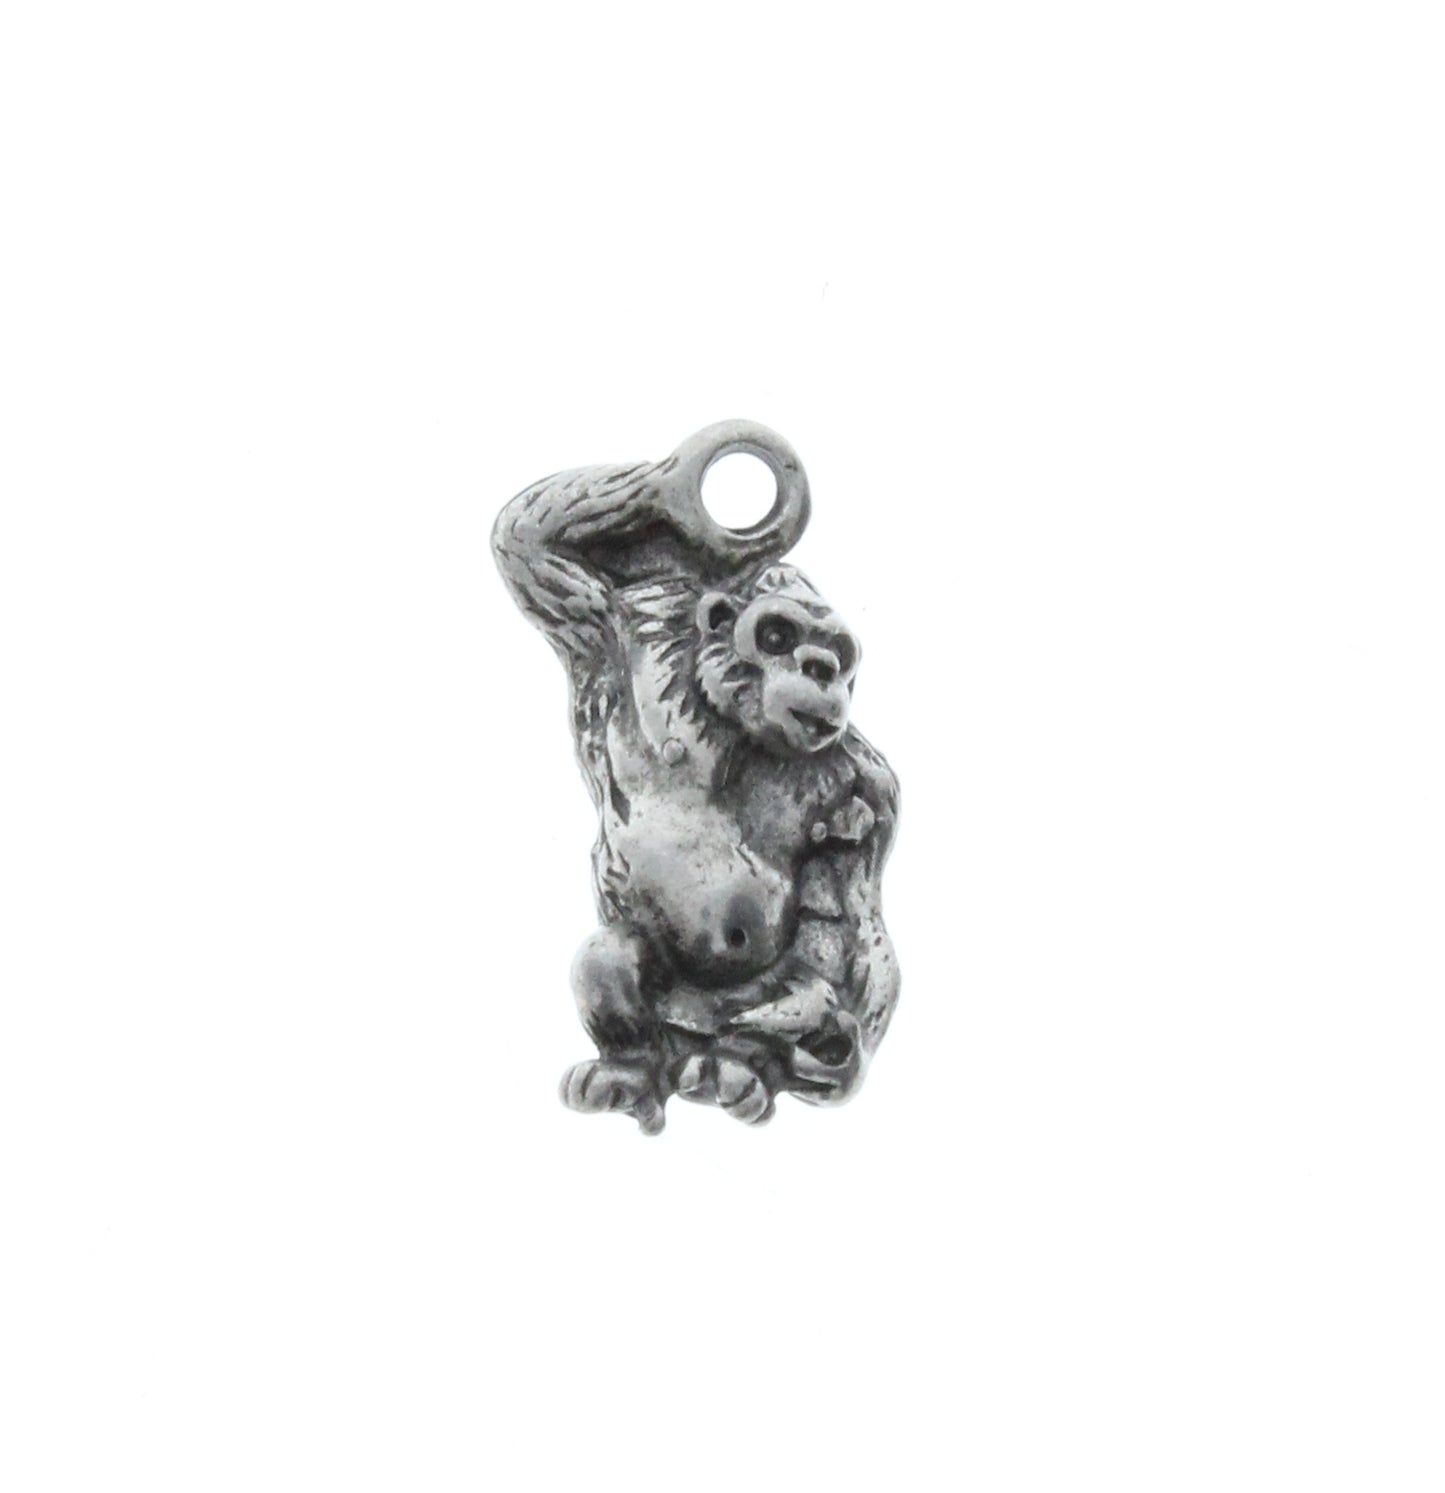 Gorilla Charm with Ring, Pk/6